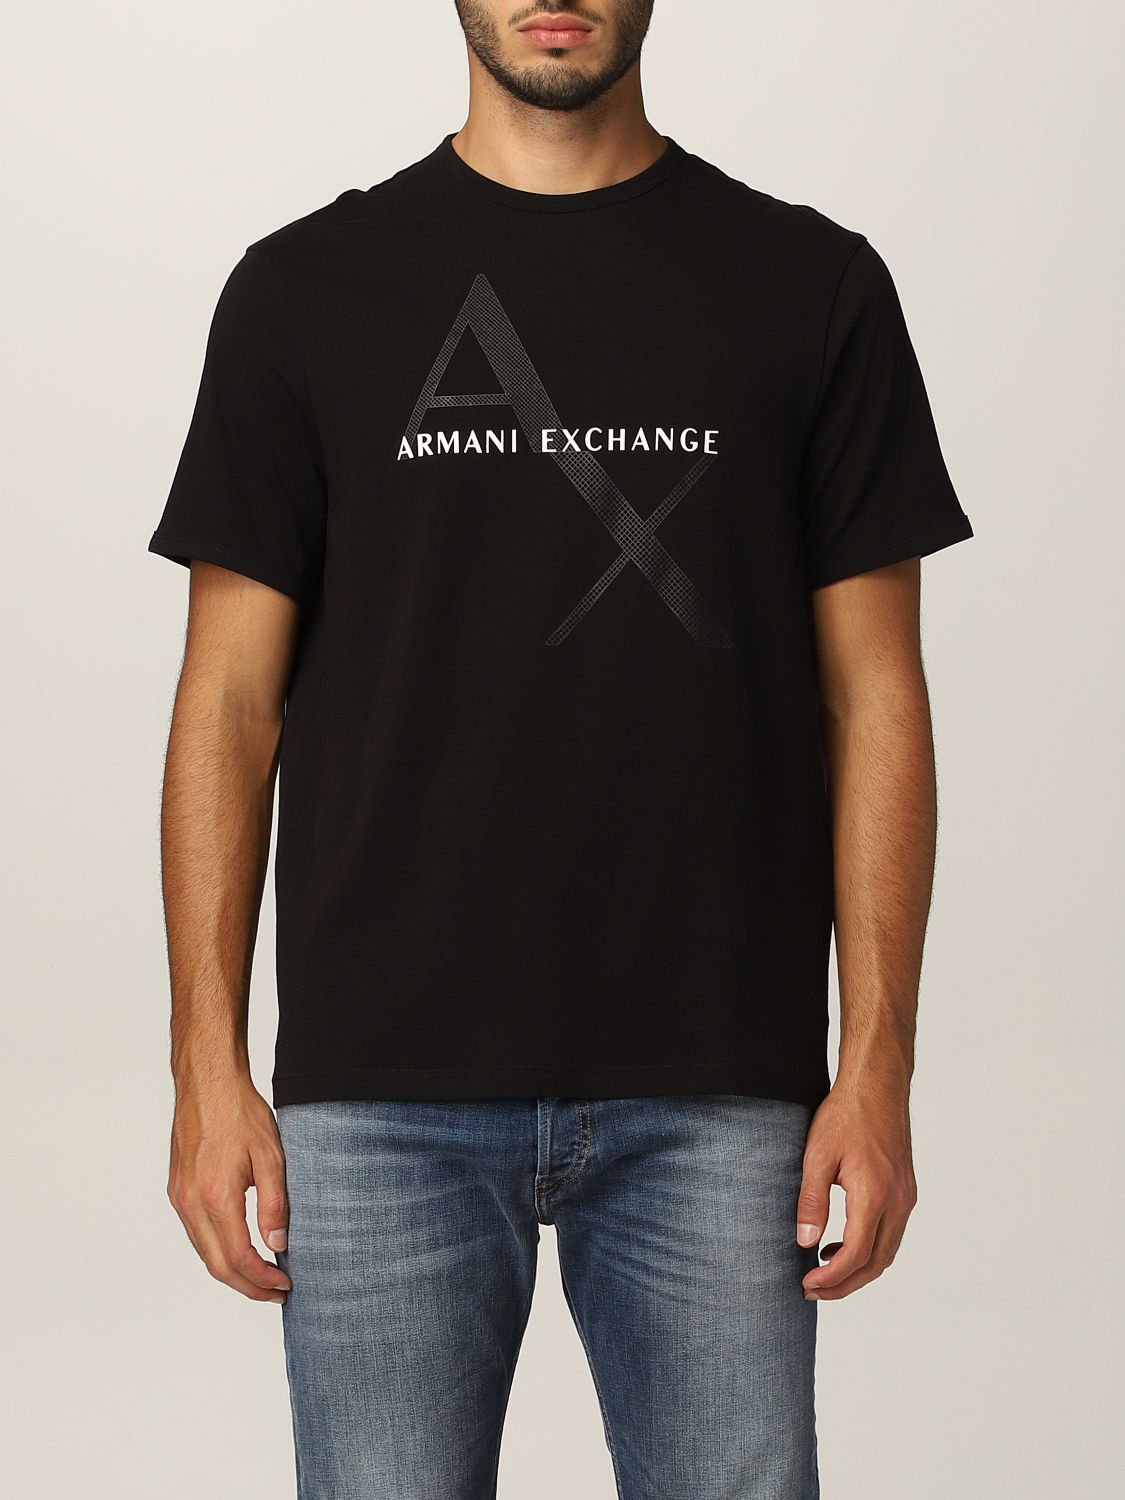 ARMANI EXCHANGE: T-shirt in cotton jersey with logo - Black | T-Shirt ...